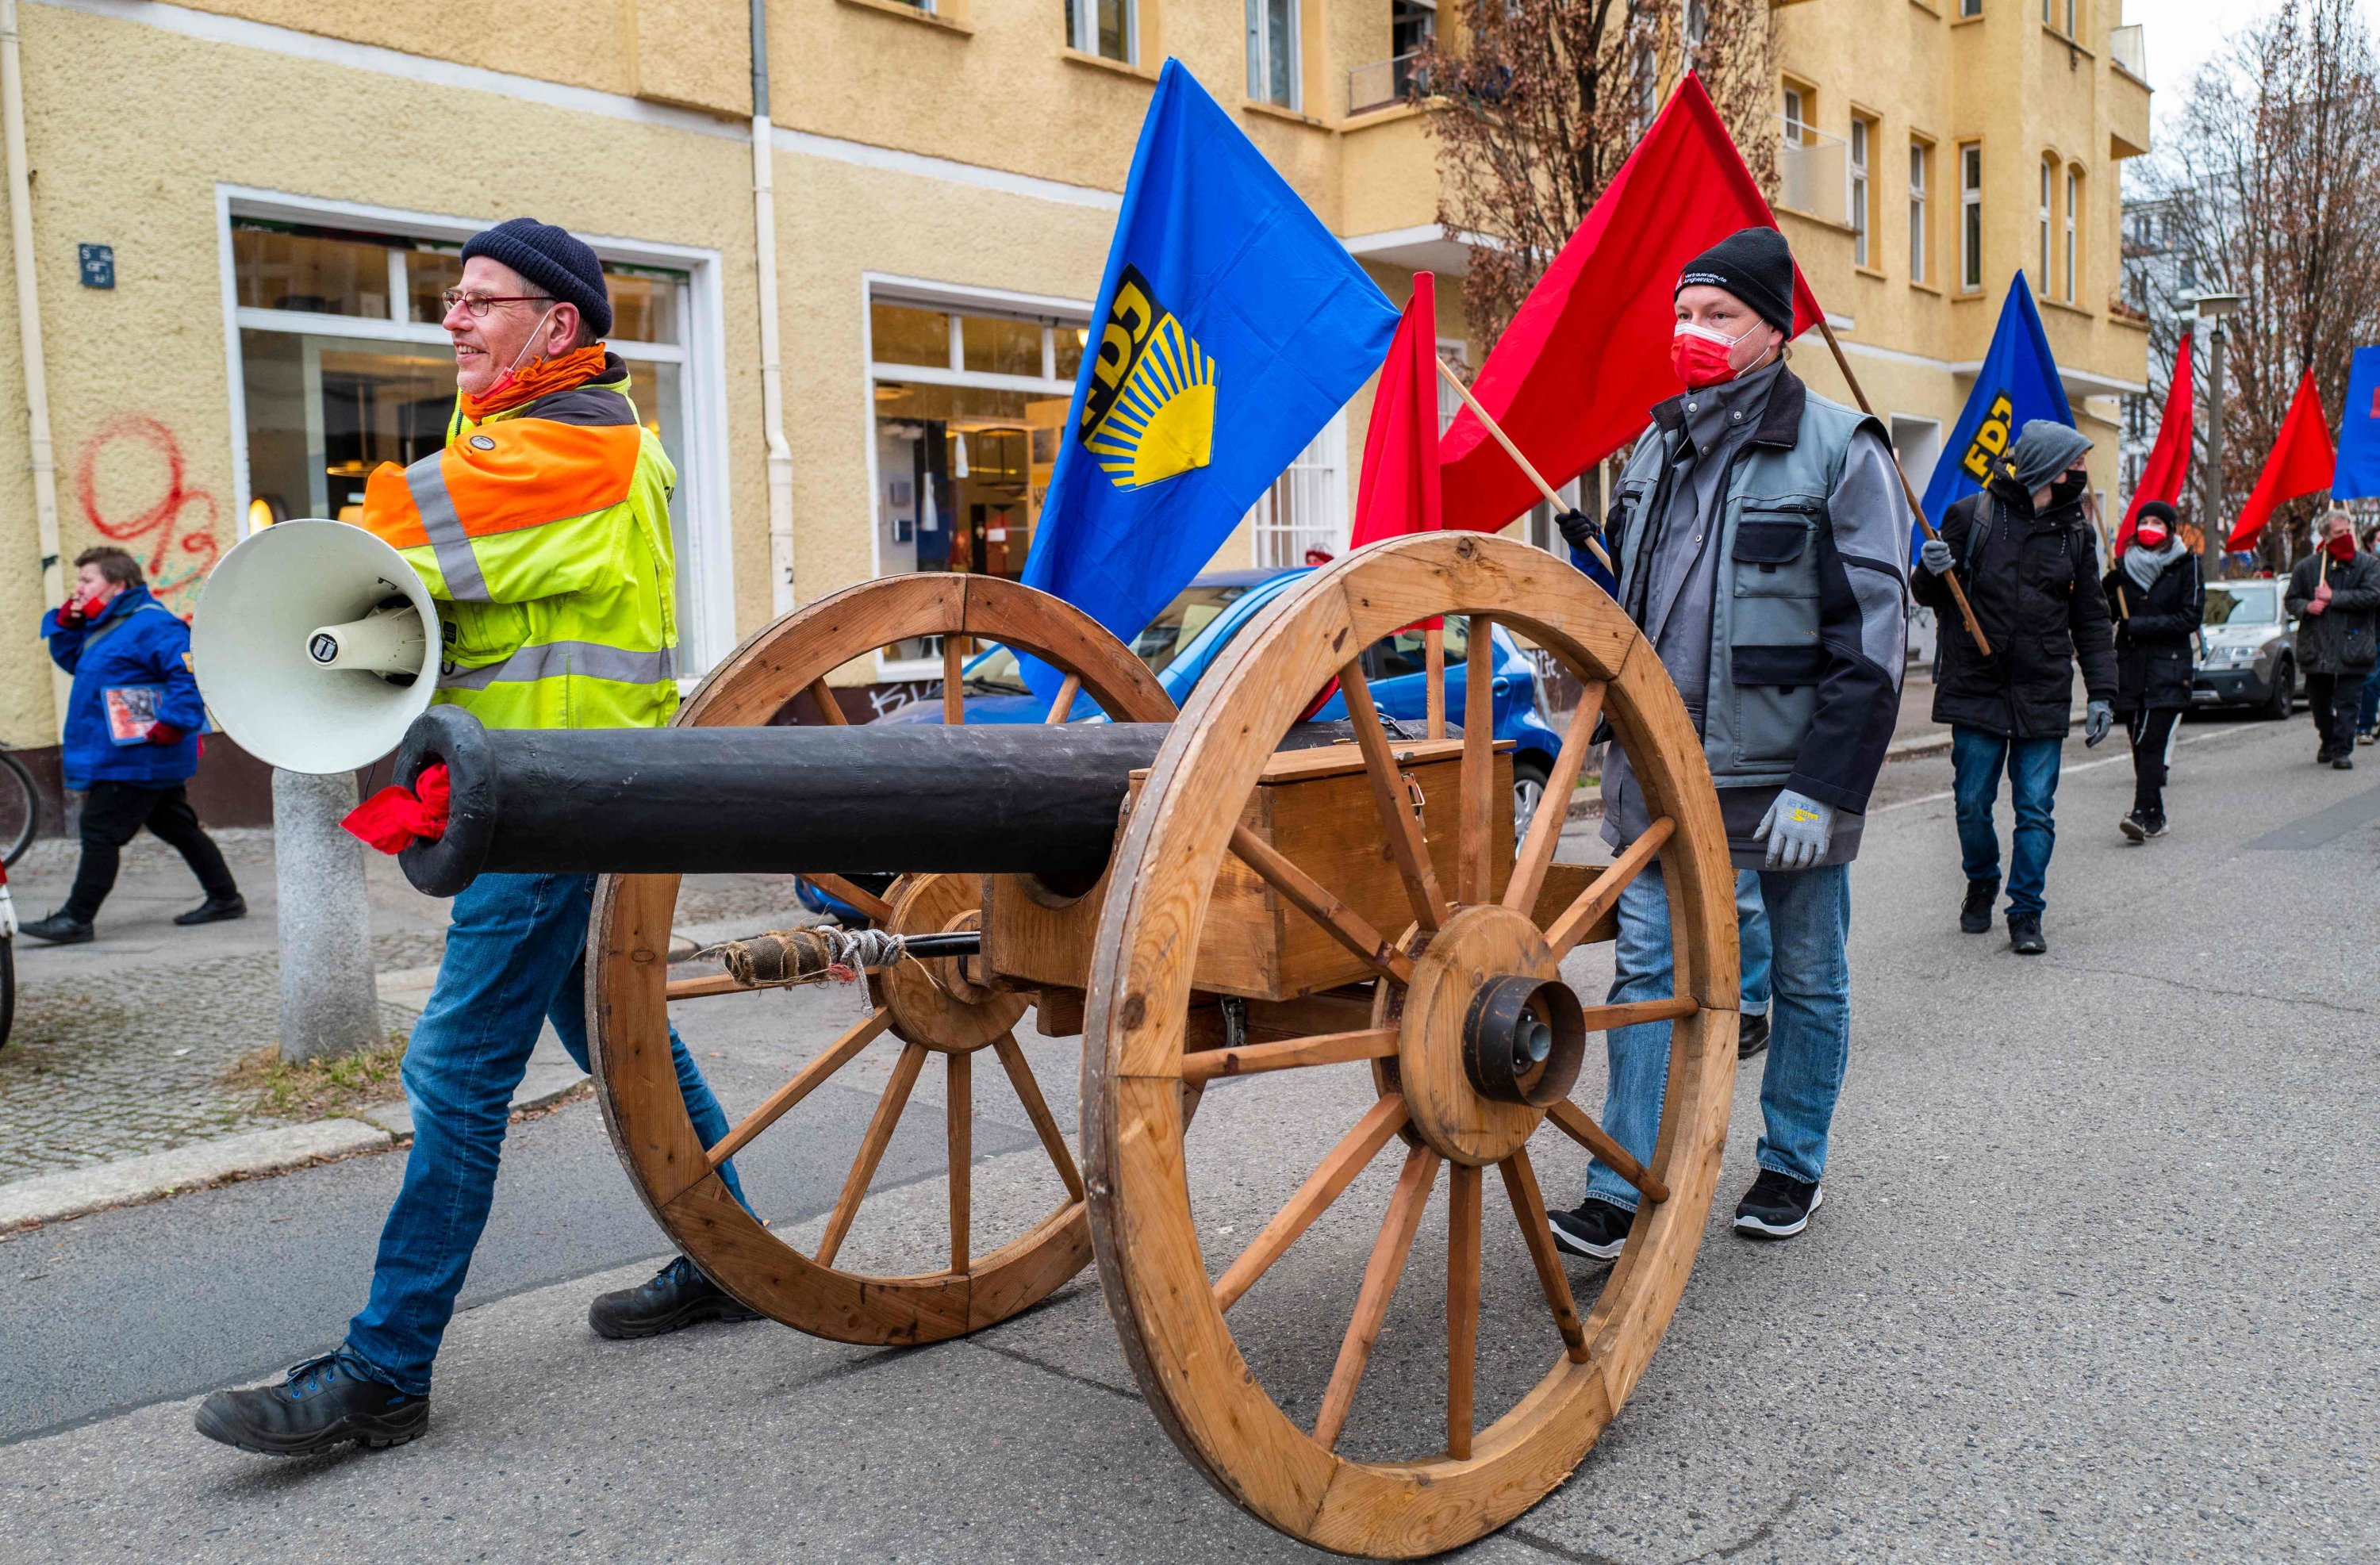 A replica of a cannon is paraded during a demonstration by various leftist organizations to commemorate the 150th anniversary of the Paris Commune uprising, in Berlin, Germay, March 20, 2021. (AFP Photo)